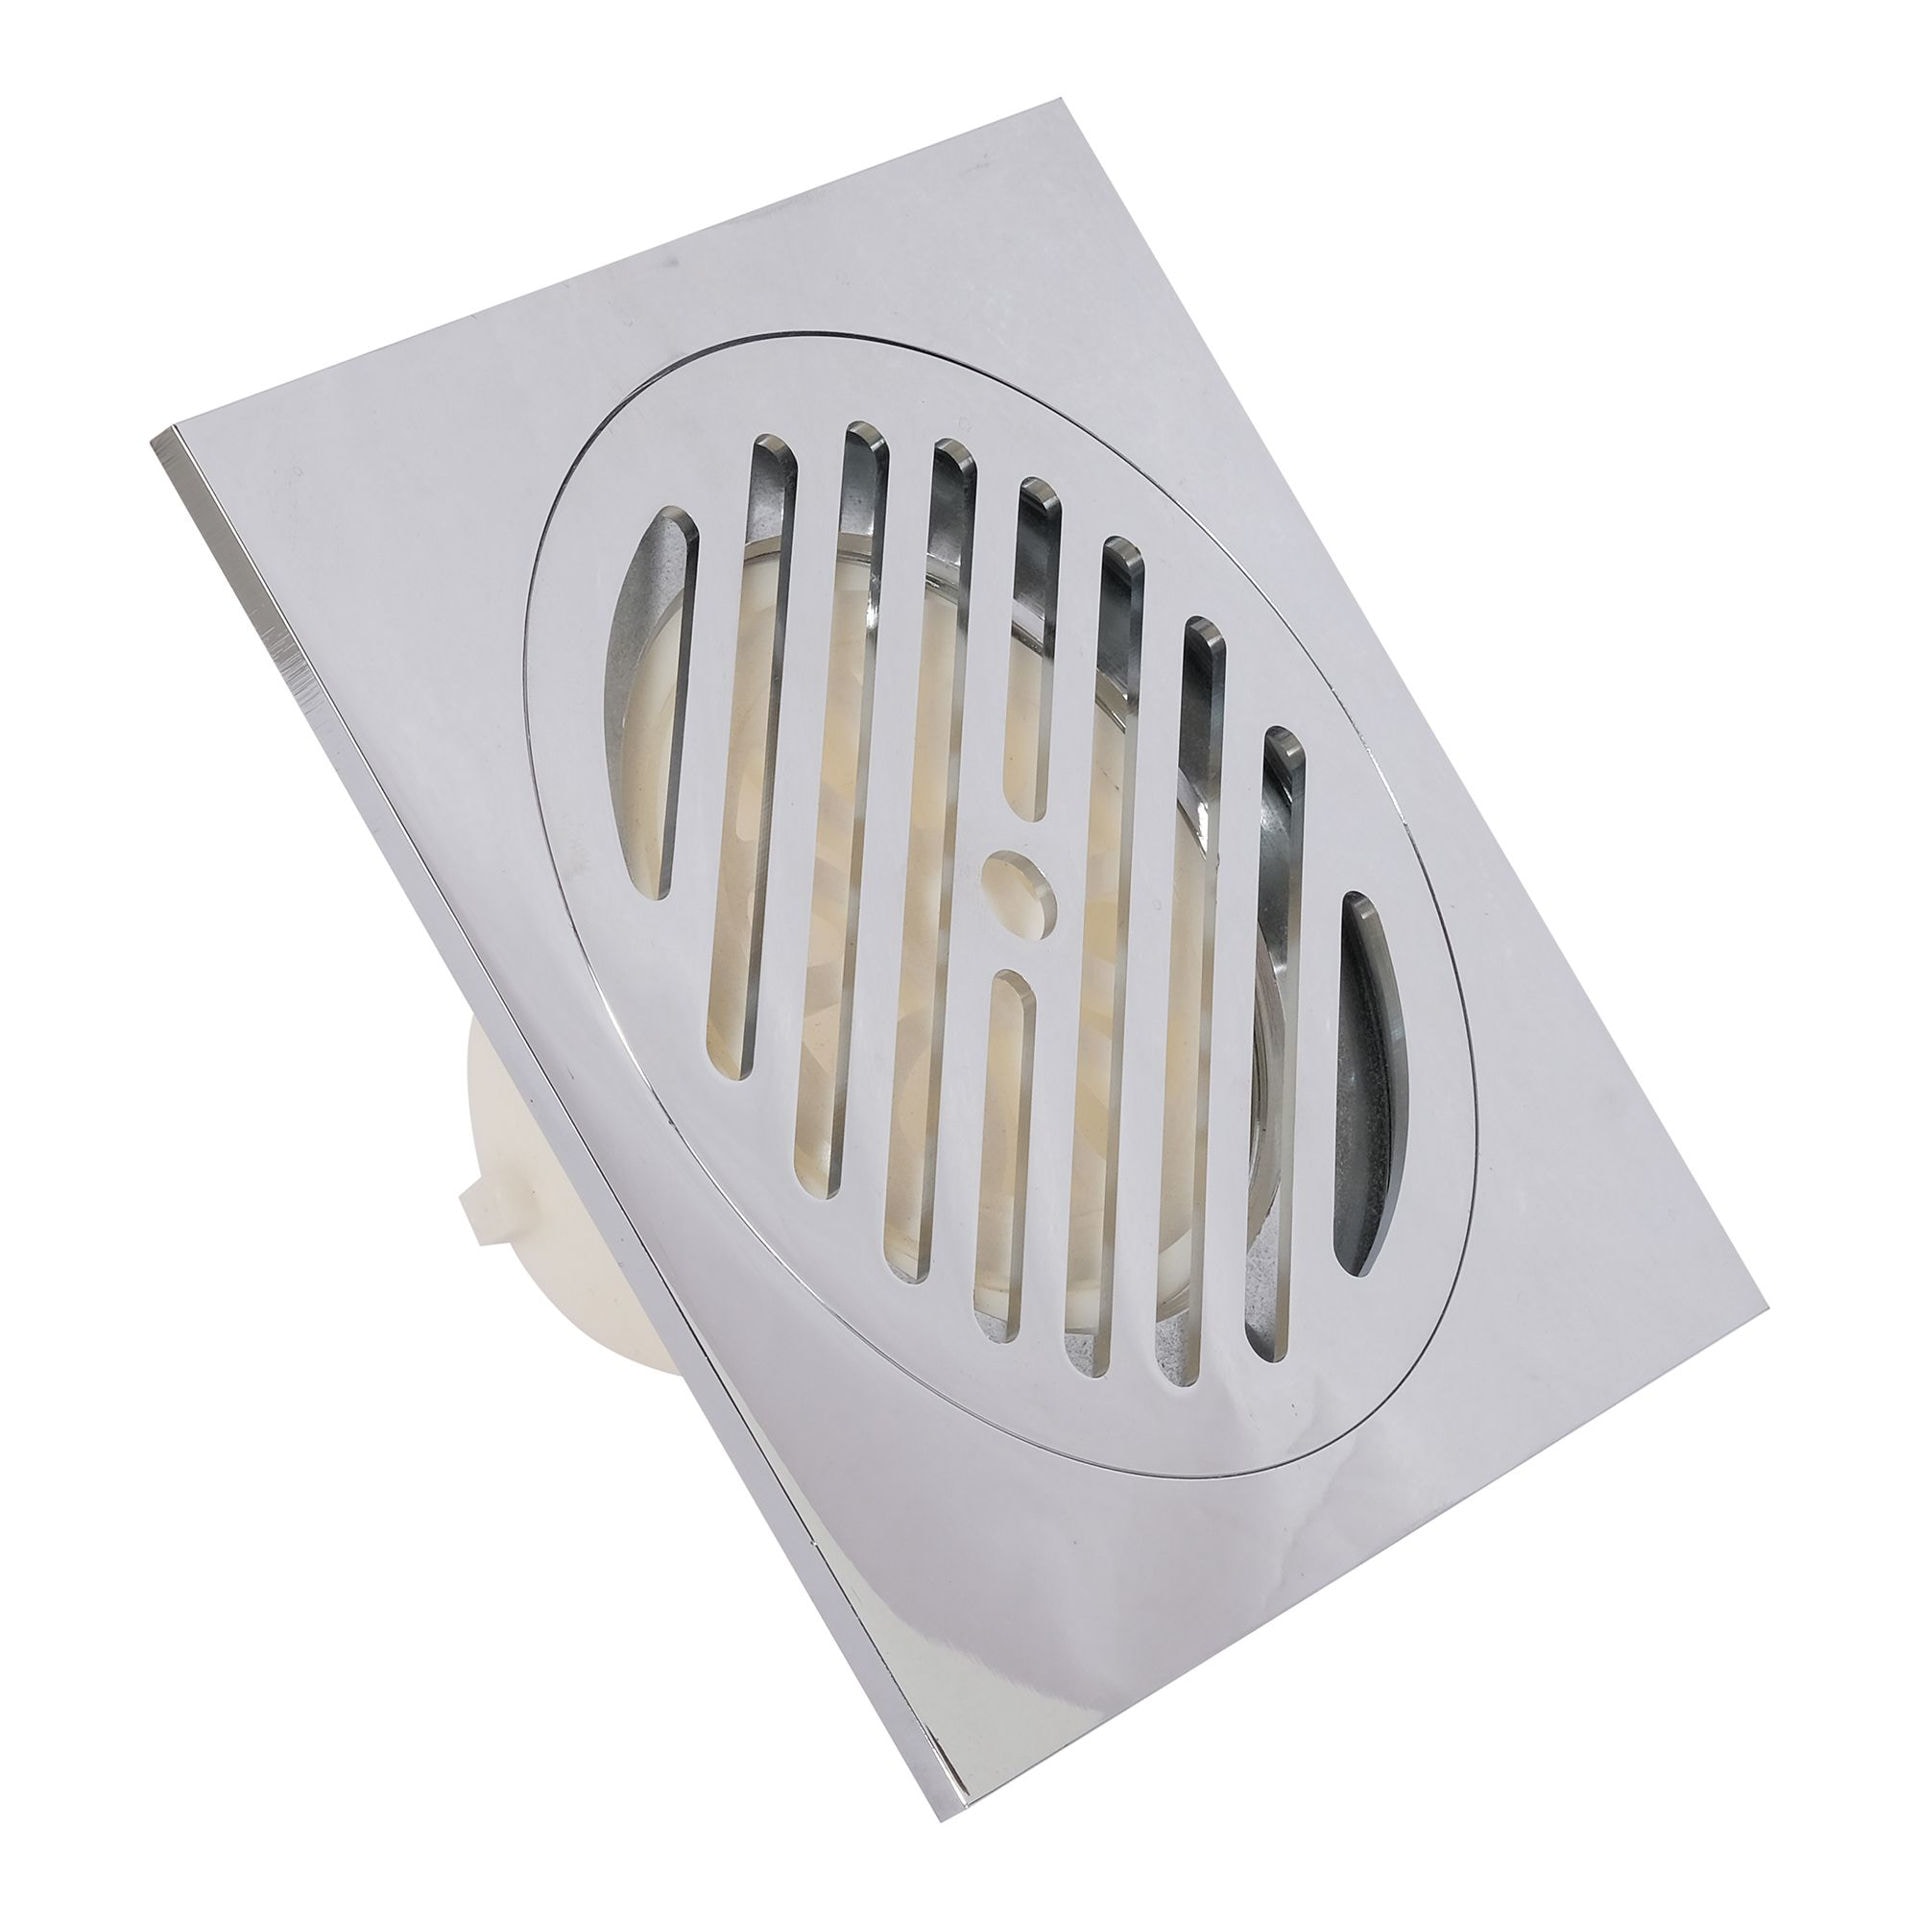 SQUARE SHOWER STAINLESS STEEL FLOOR DRAIN WITH REMOVABLE COVER SIZE 15X15CM